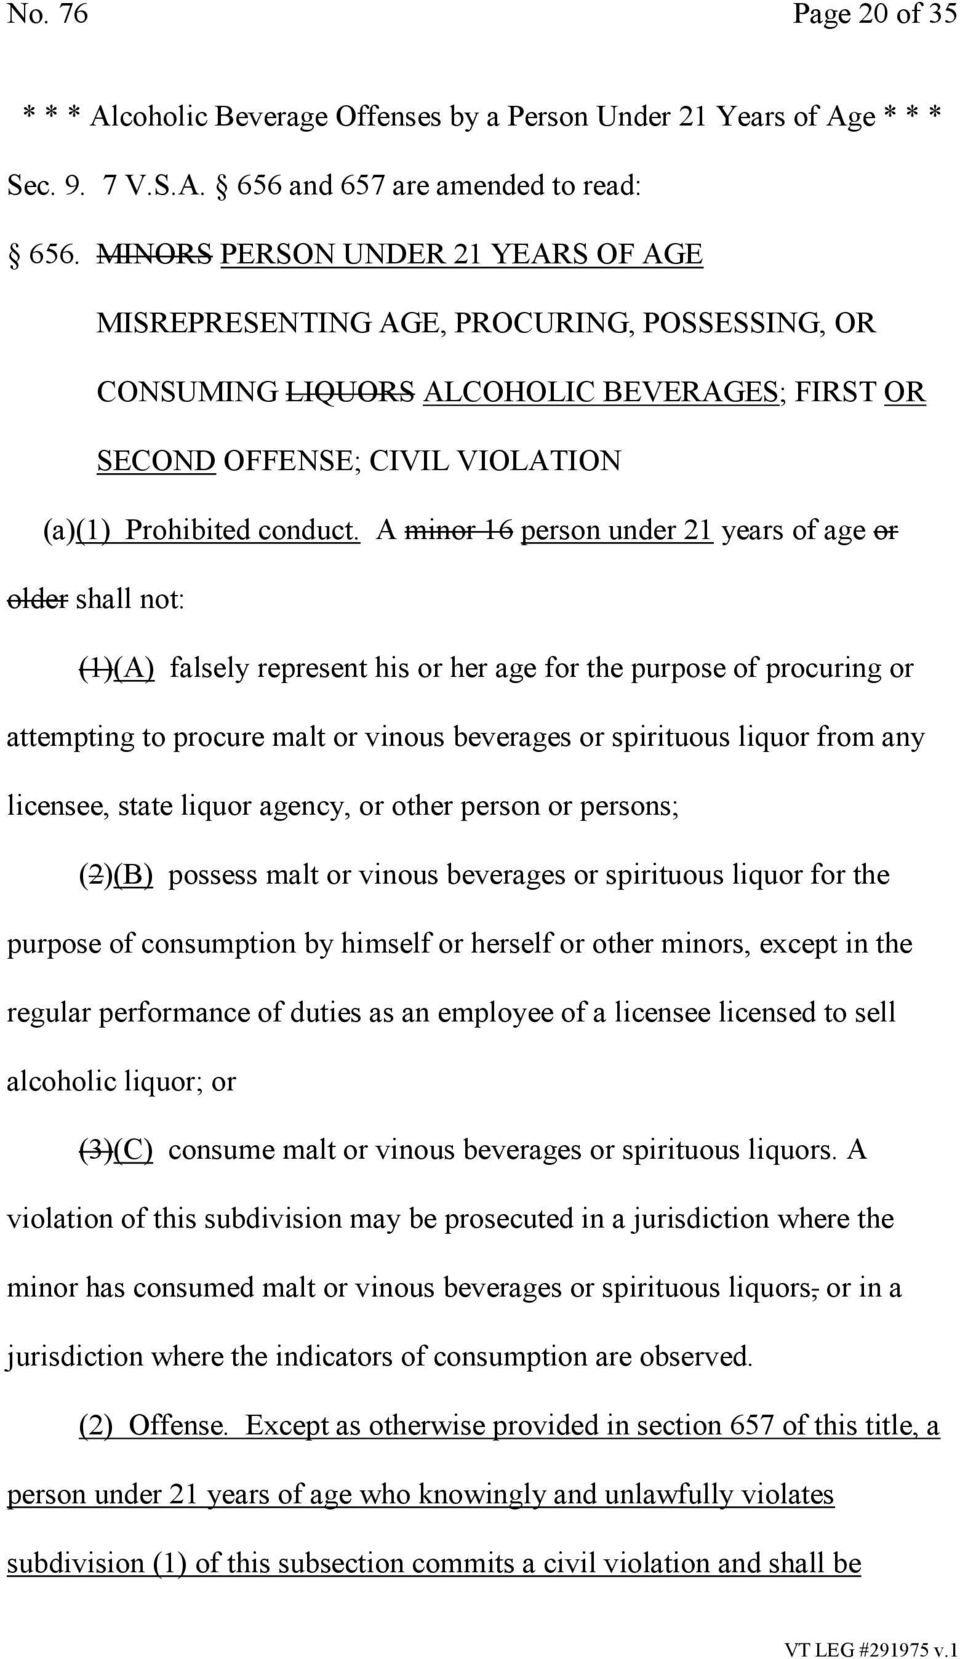 A minor 16 person under 21 years of age or older shall not: (1)(A) falsely represent his or her age for the purpose of procuring or attempting to procure malt or vinous beverages or spirituous liquor